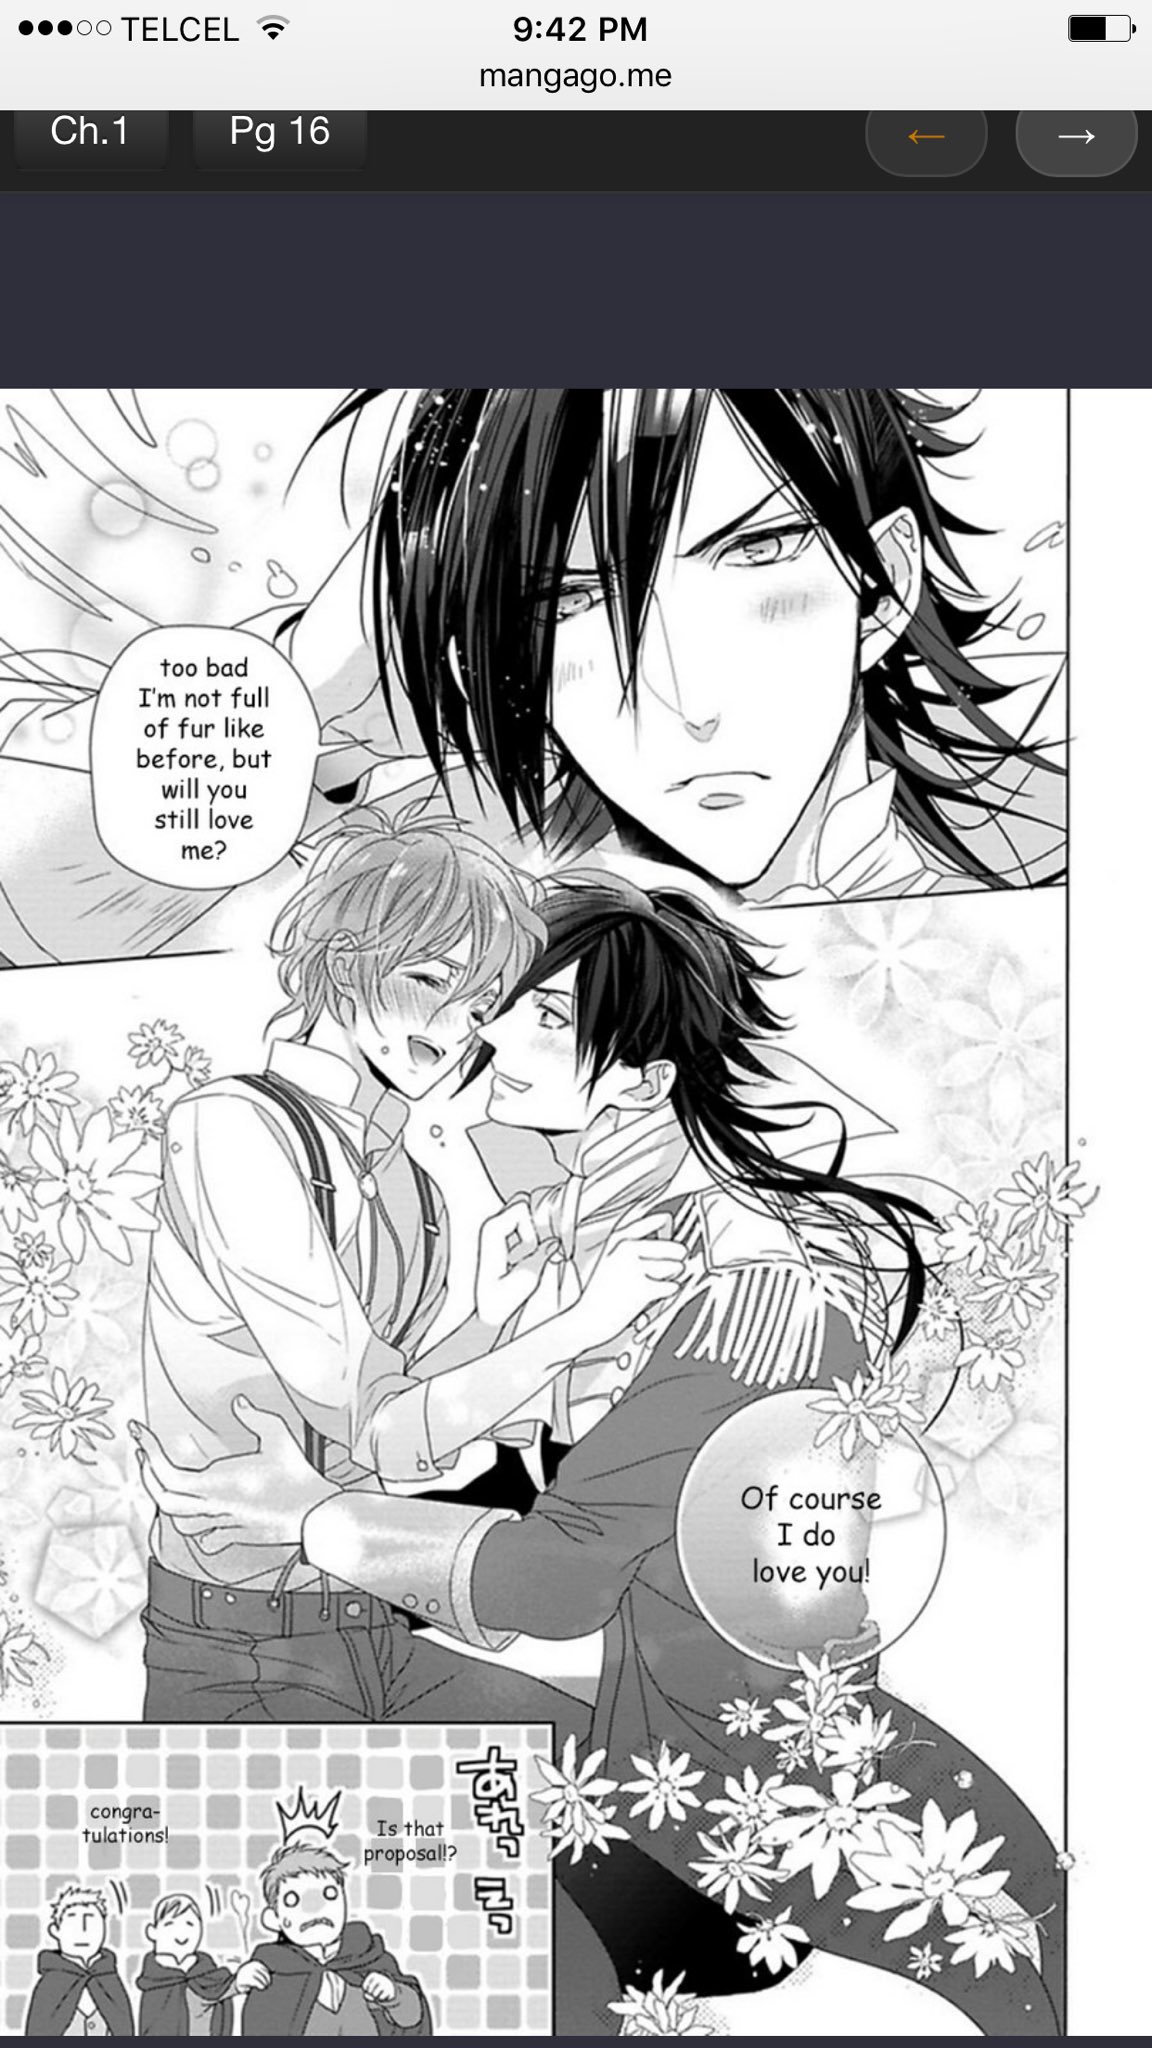 Emokid1996 Beauty And The Beast In Yaoi I Just